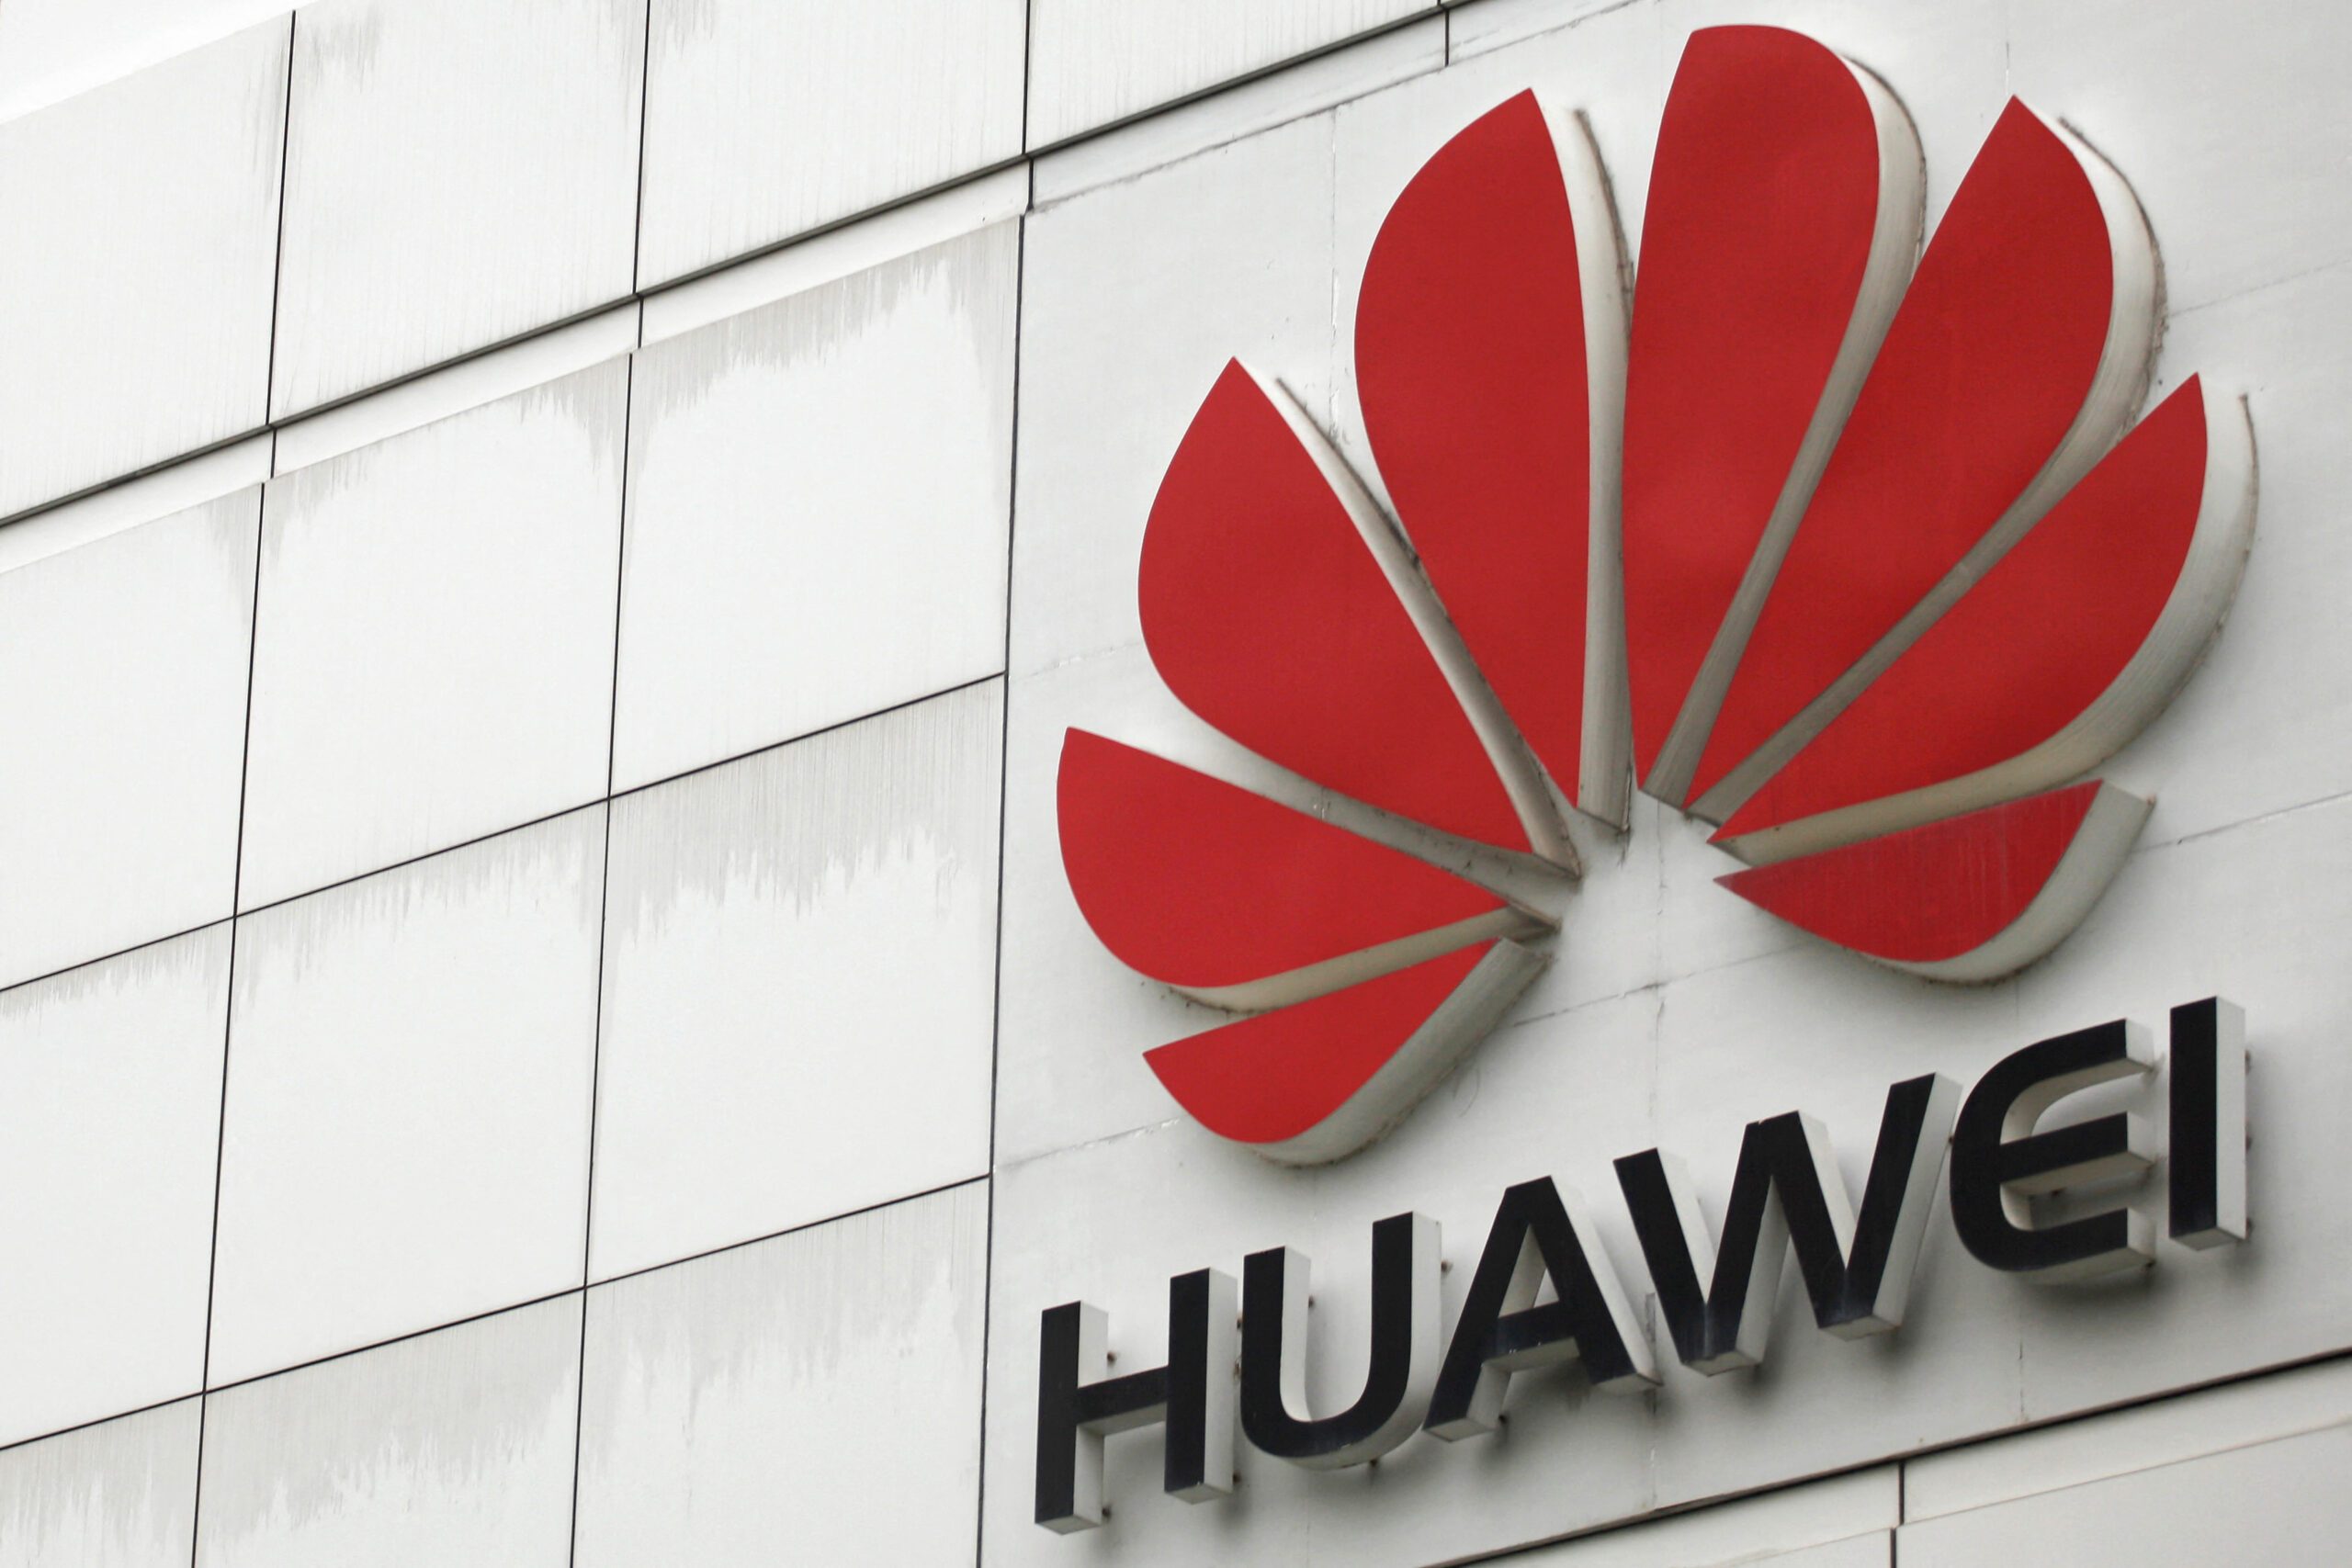 In latest EV push, China's Huawei launches new software for intelligent driving